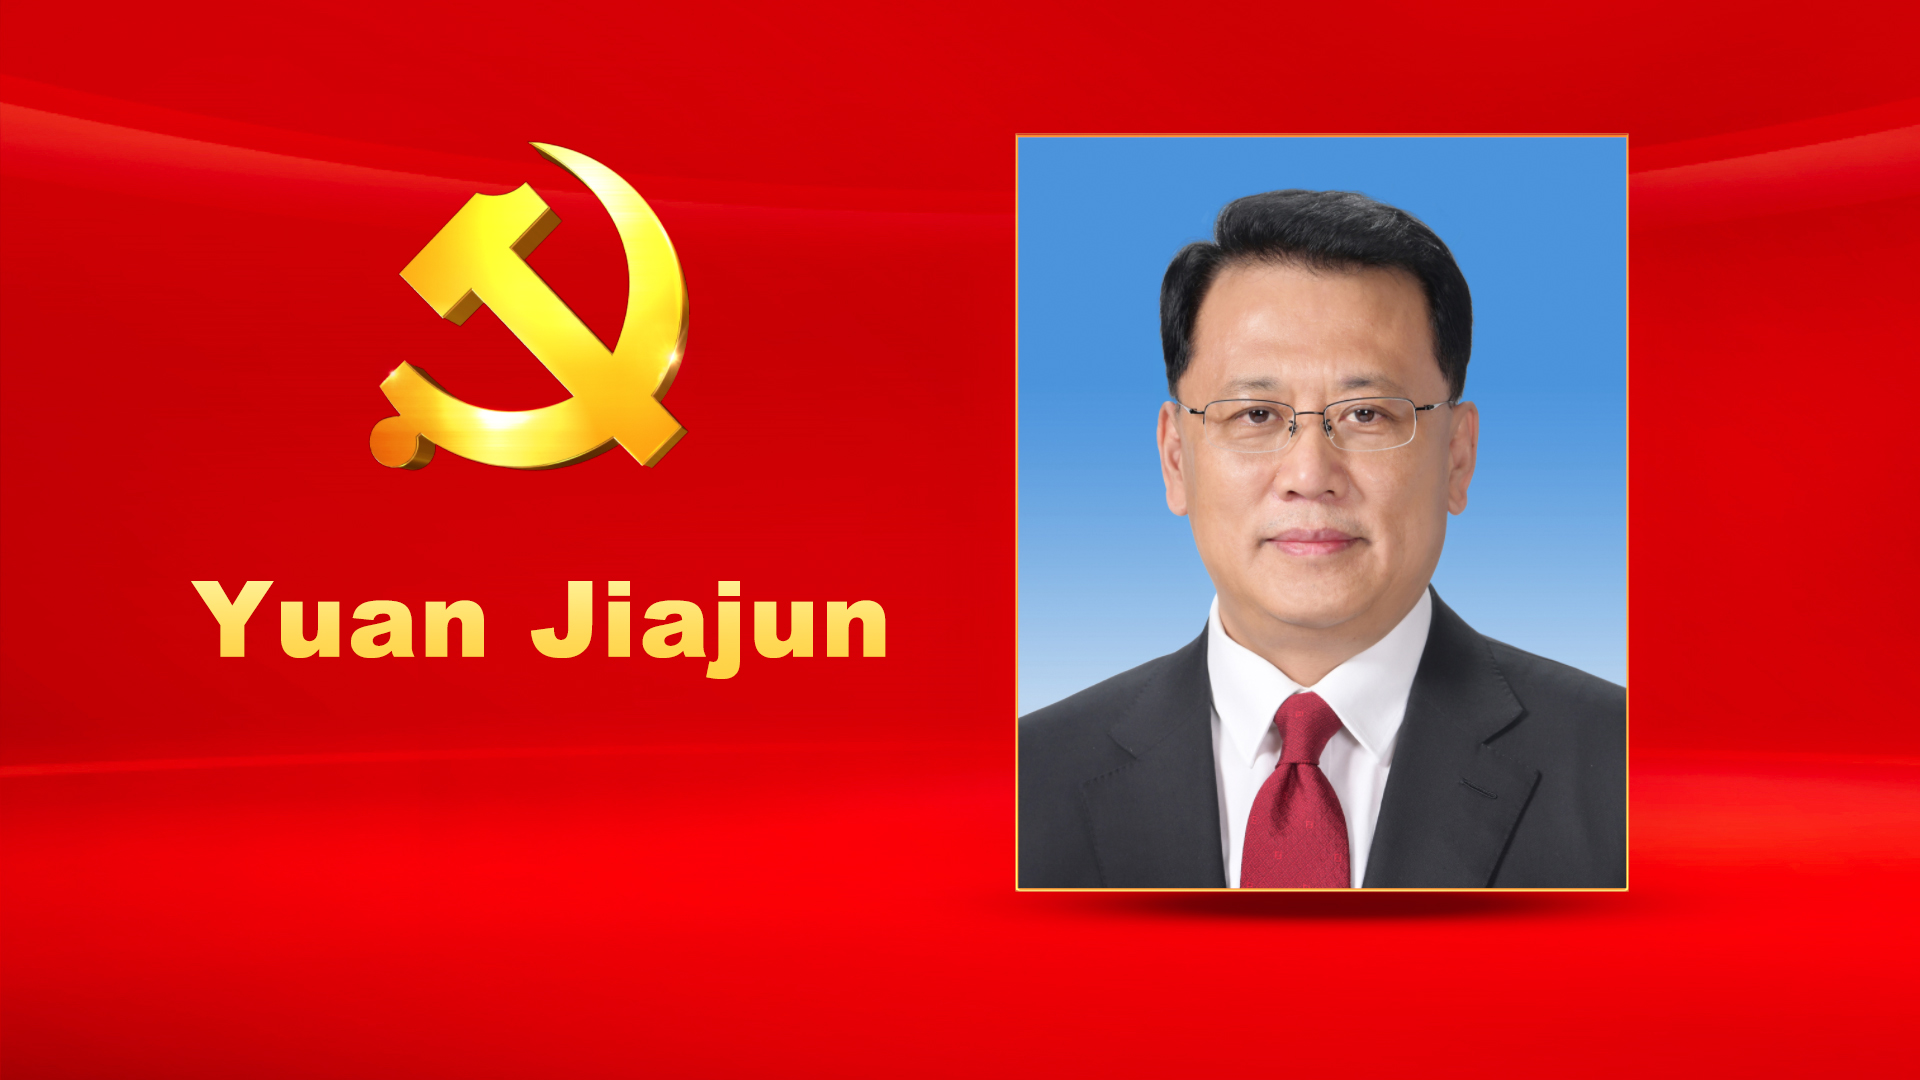 Yuan Jiajun, male, Han ethnicity, was born in September 1962 and is from Tonghua, Jilin Province. He began his first job in July 1987 and joined the Communist Party of China (CPC) in November 1992. Yuan graduated from No.501 Division, Fifth Institute, Ministry of Aviation and Aerospace Industry where he completed a graduate program in spacecraft design and was awarded a Doctor of Engineering degree. He holds a professional title of research fellow. Yuan is currently a member of the CPC Central Committee Political Bureau, Secretary of the CPC Zhejiang Provincial Committee and Chairman of the Standing Committee of the Zhejiang Provincial People's Congress.